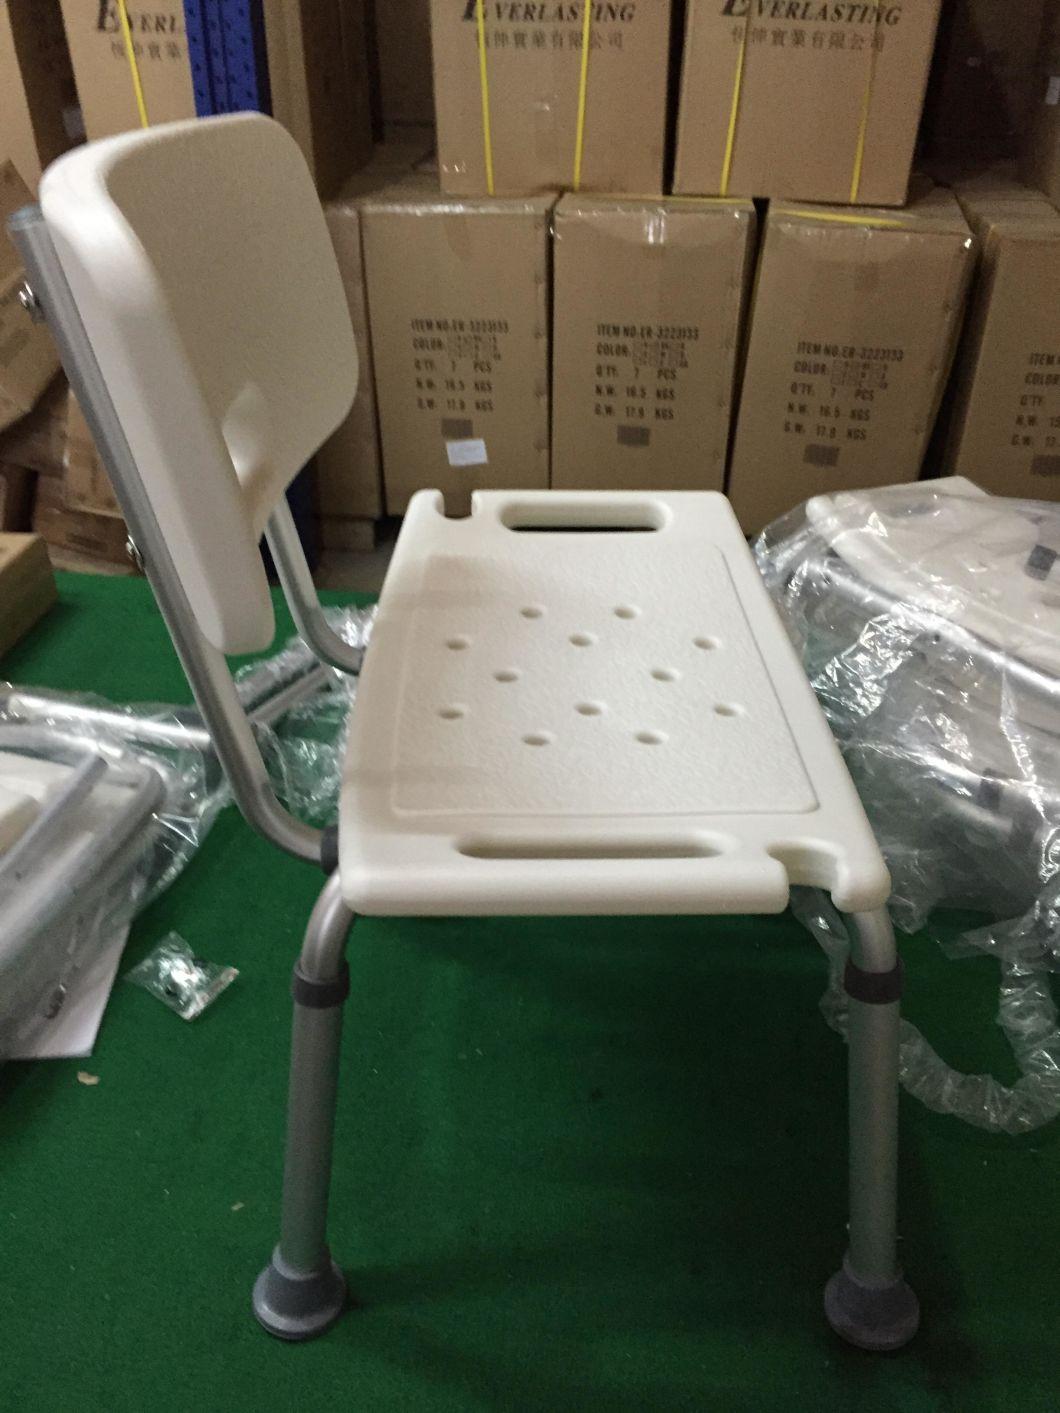 Commode Chair - Bath Seat with Detachable Back Shower Chair